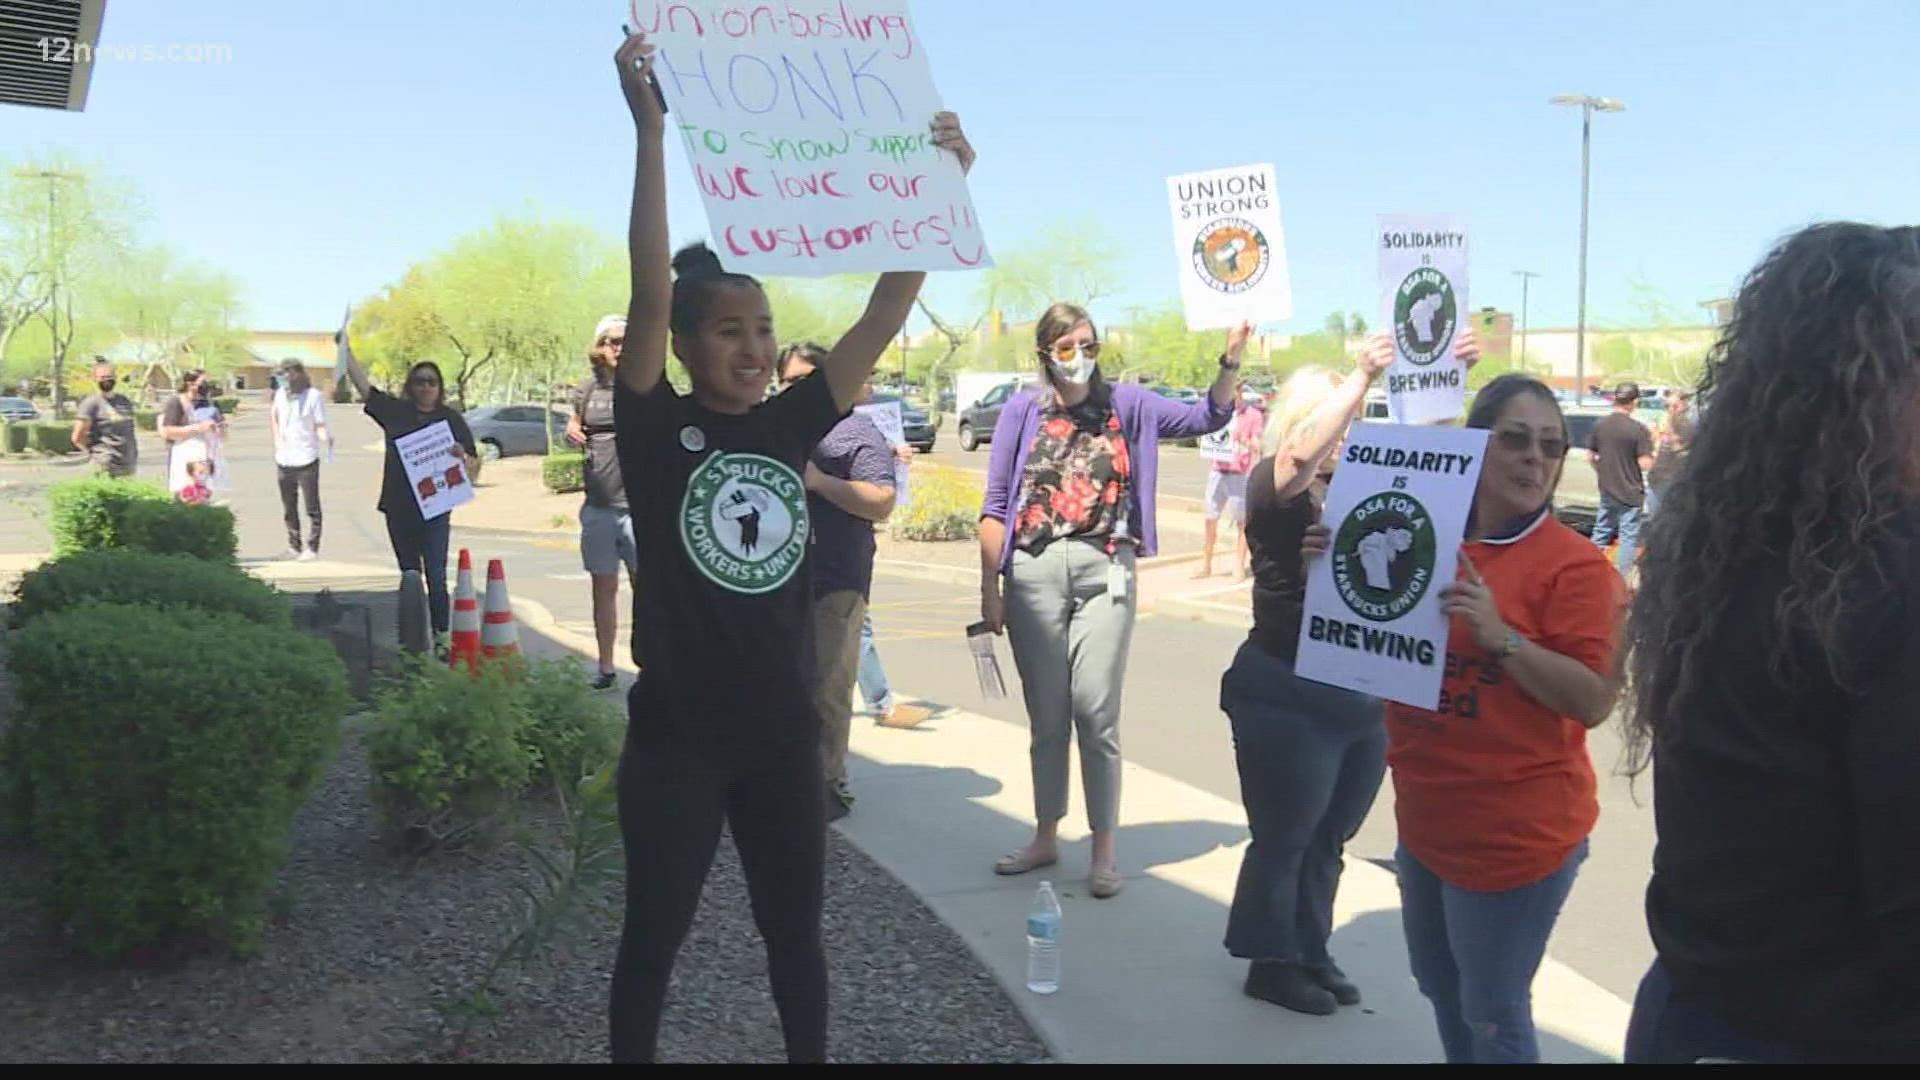 19-year-old Leila Dalton was fired Monday by Starbucks. Dalton was a lead union organizer at this Starbucks. A union vote was scheduled to start Tuesday.